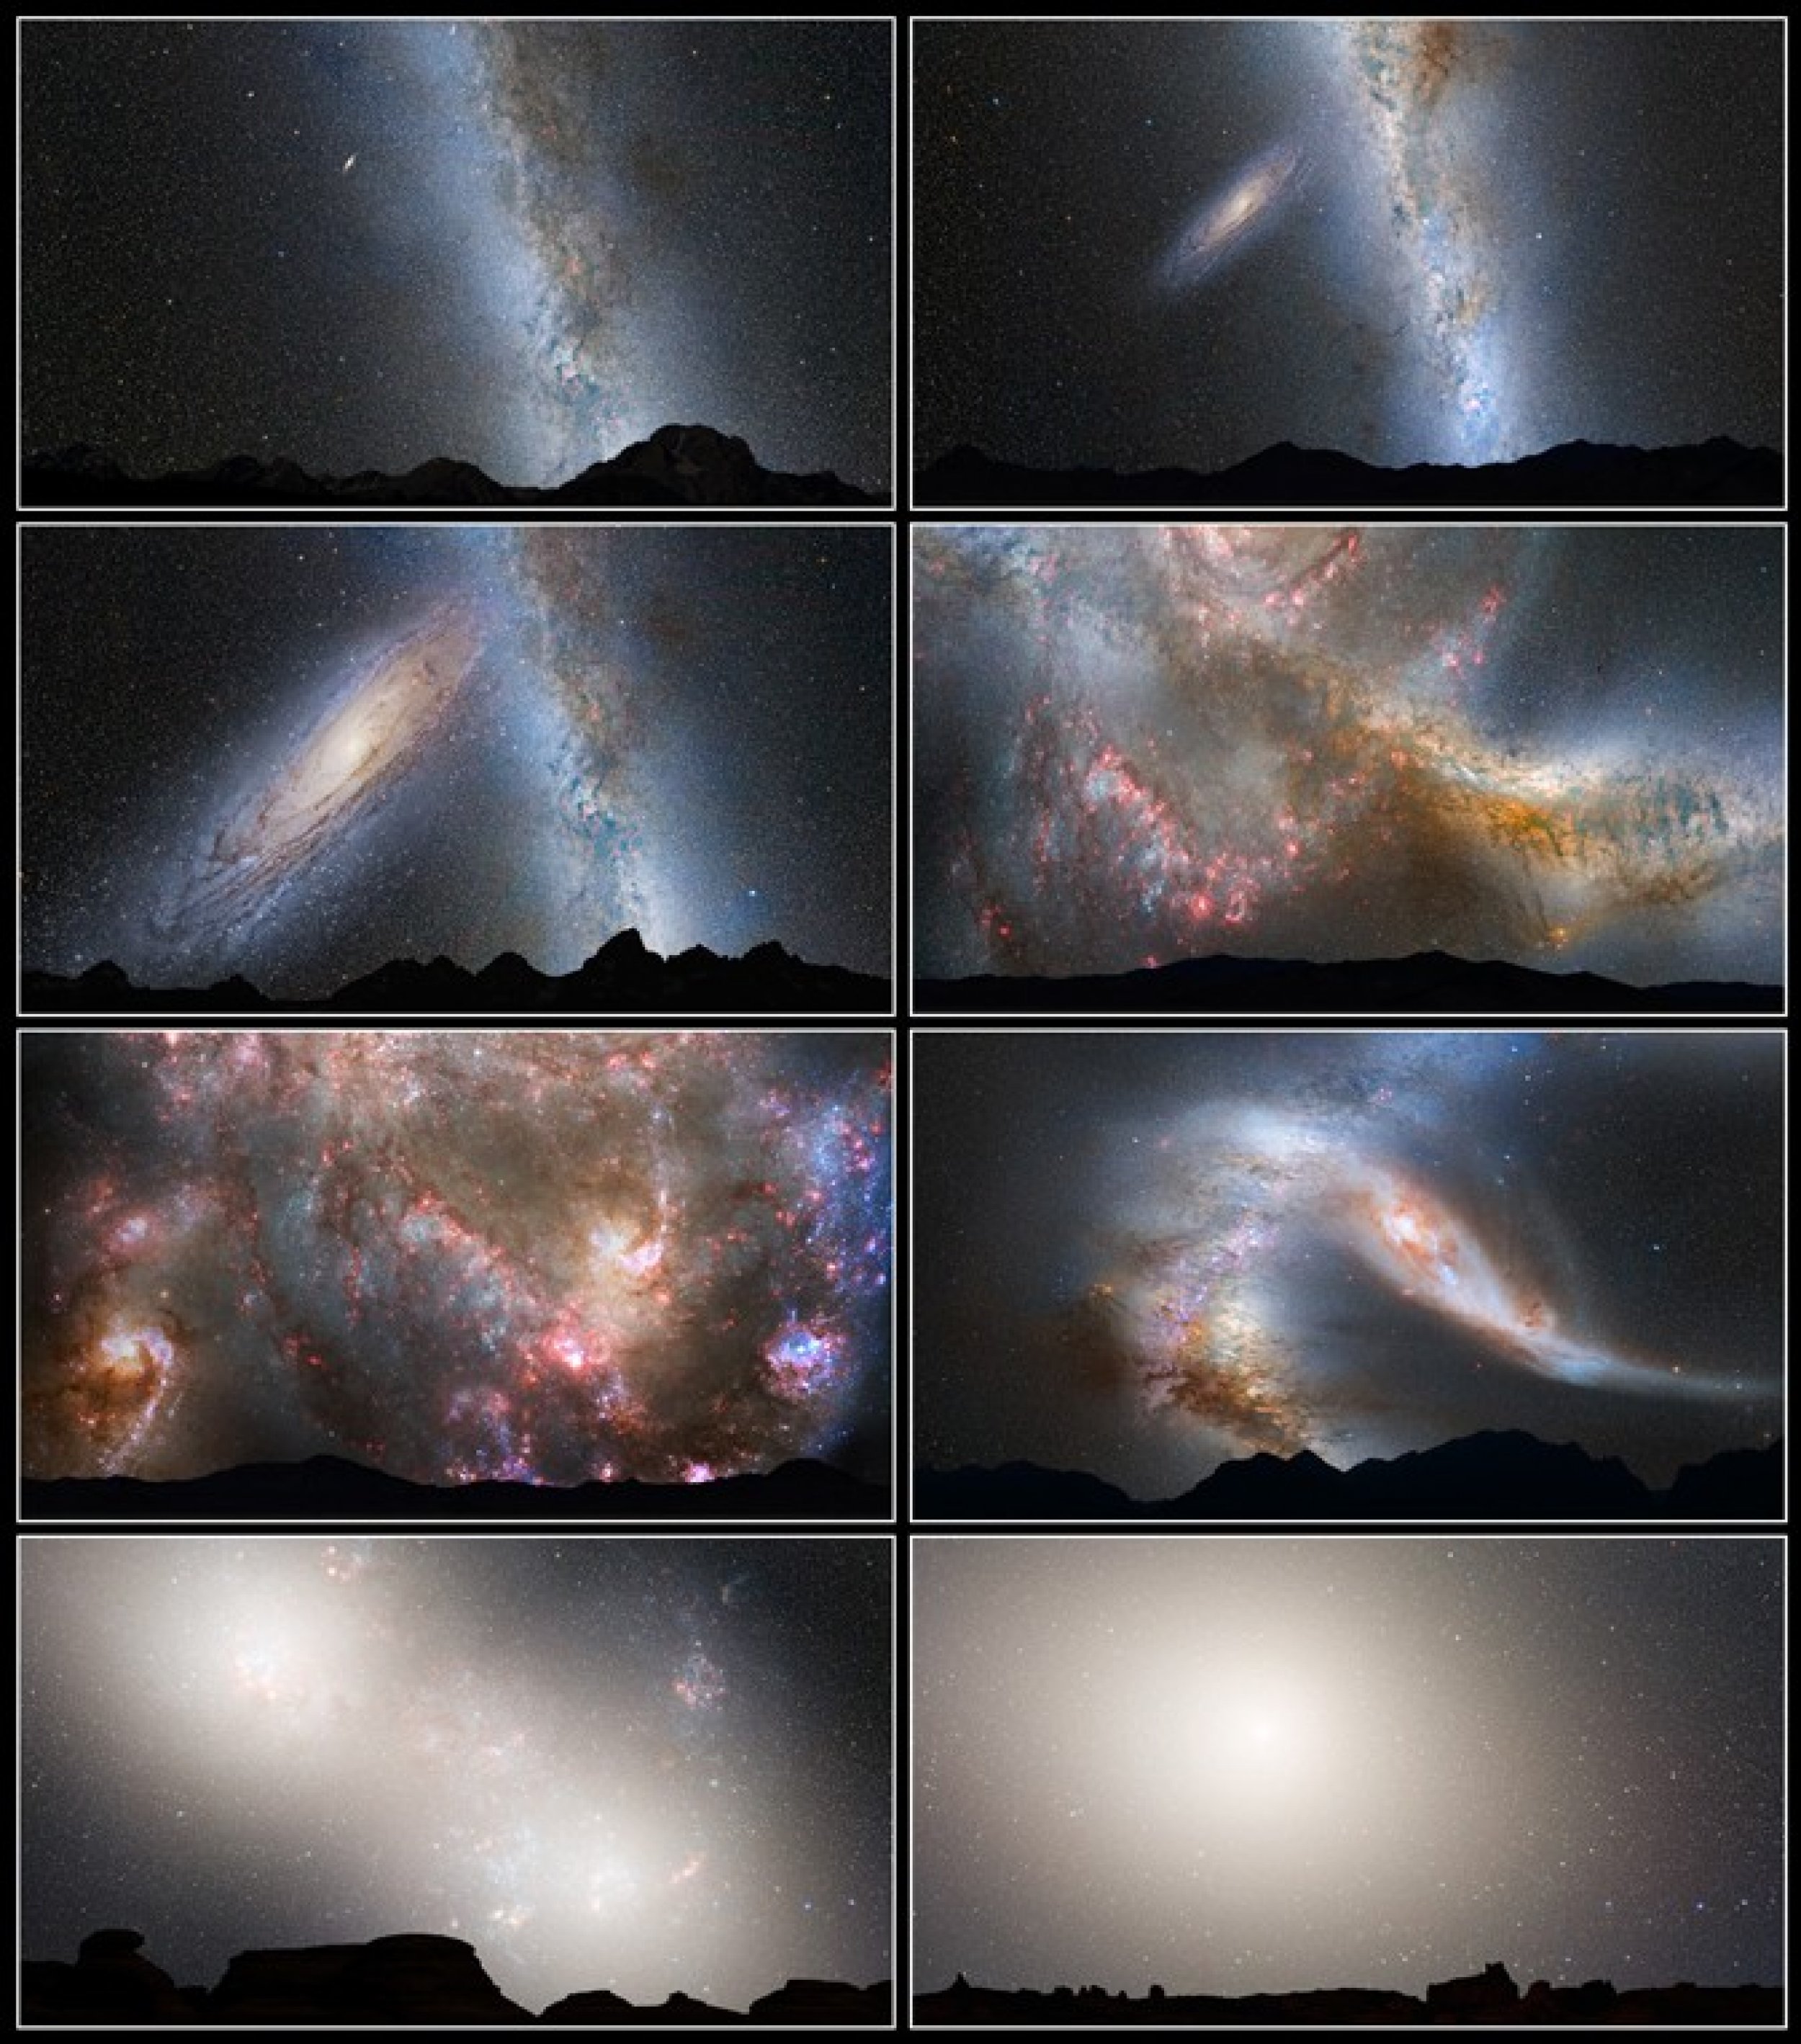 Milky Way Galaxy, Andromeda Destined For Head-On Collision